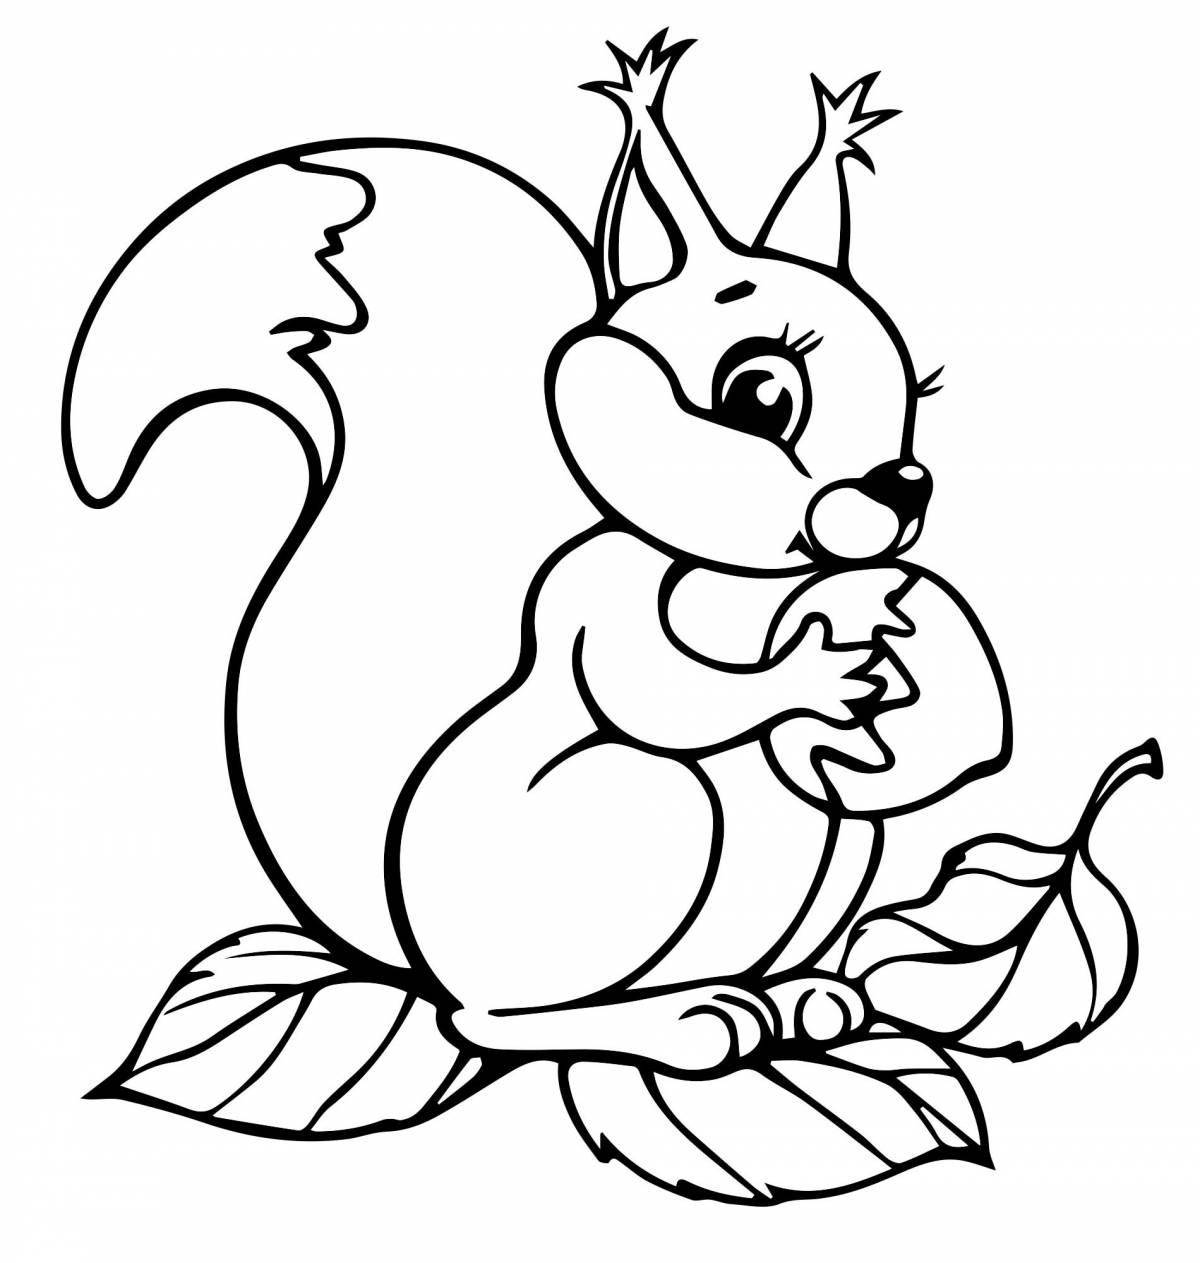 Animated squirrel with a bump